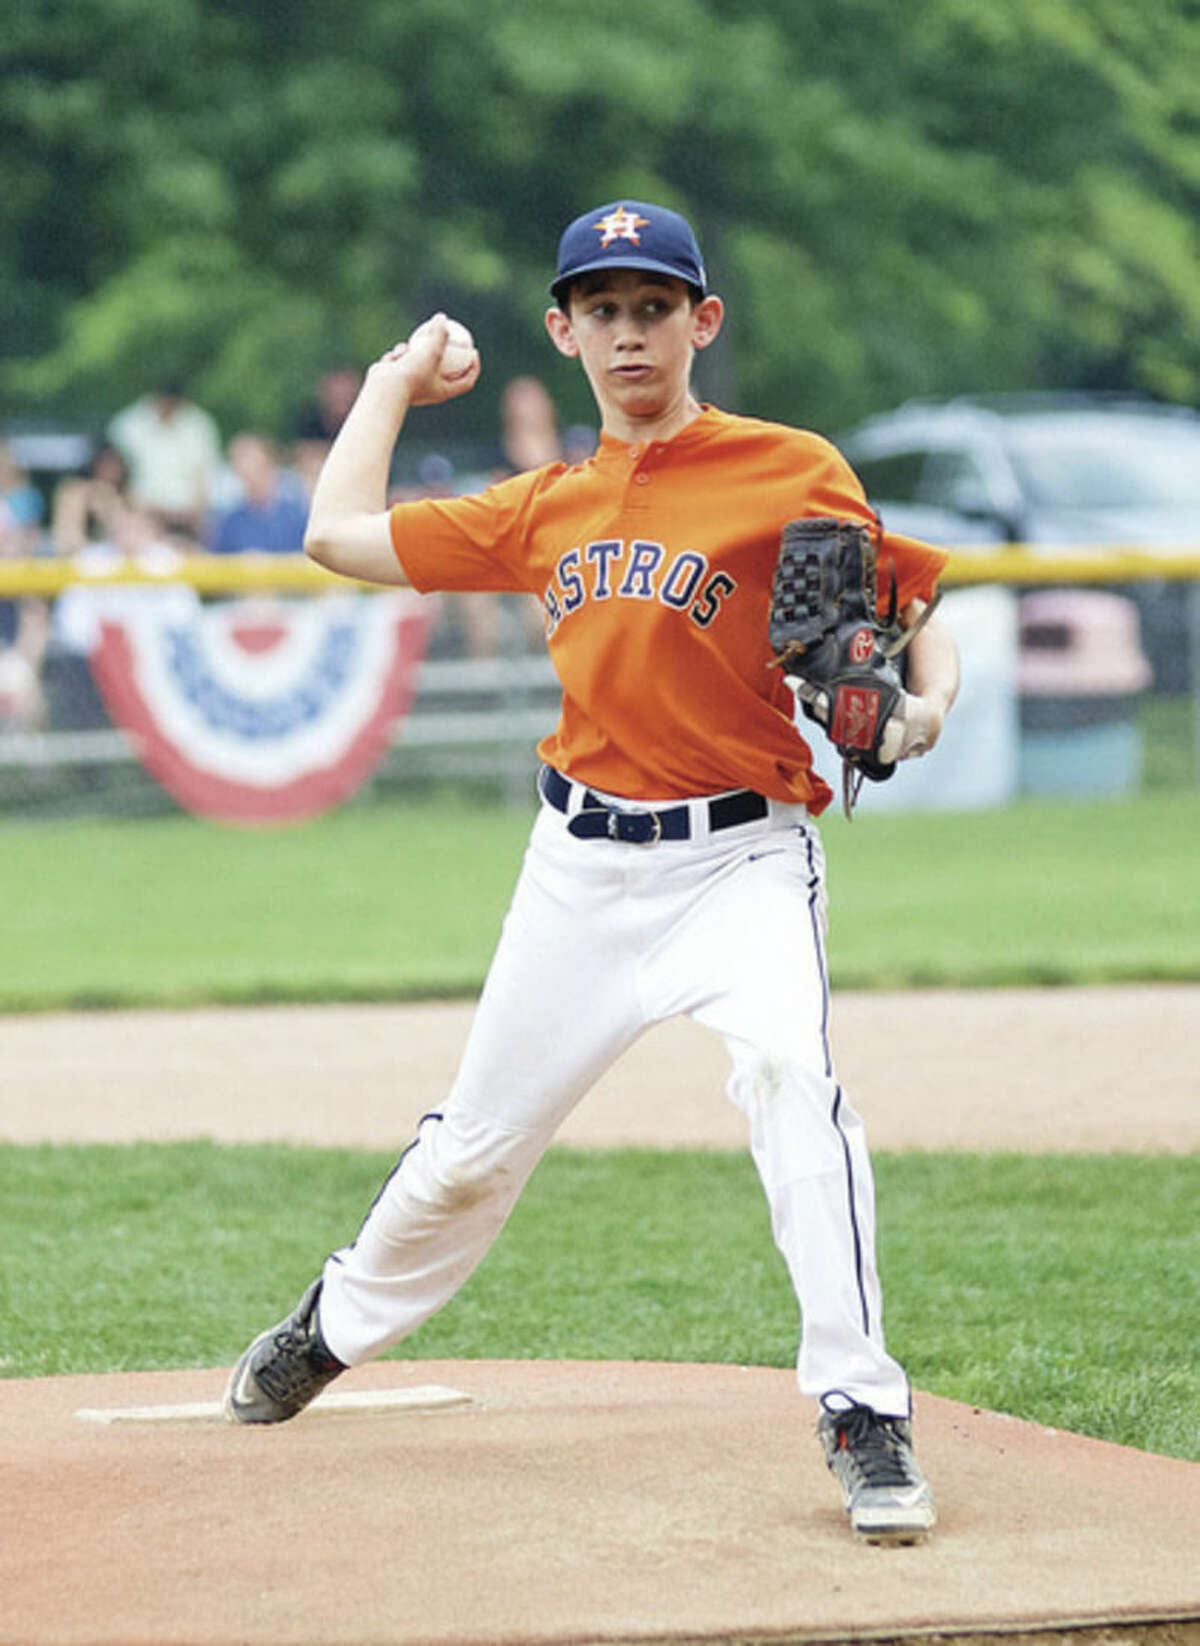 Hour photo/Danielle Calloway Astros pitcher Andrew Travers about to throw a strike during the Wilton Little League Majors Division Championship game against the Giants on Thursday evening at Bill Terry Field in Wilton.